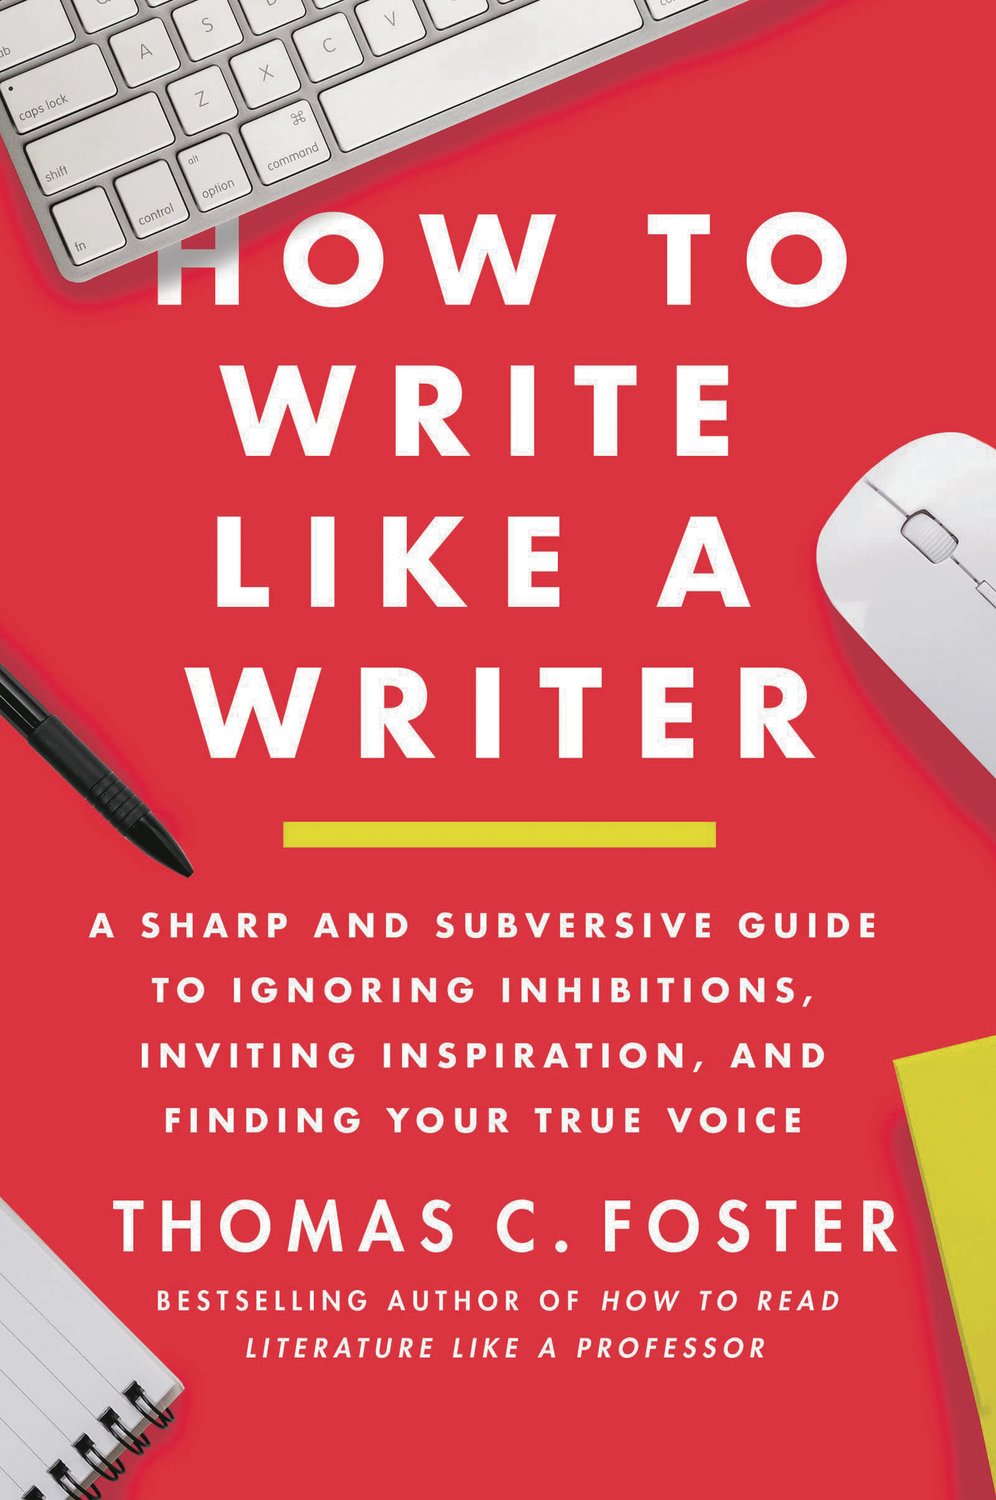 “How to Write Like a Writer” was published Sept. 6 via Harper Perennial.